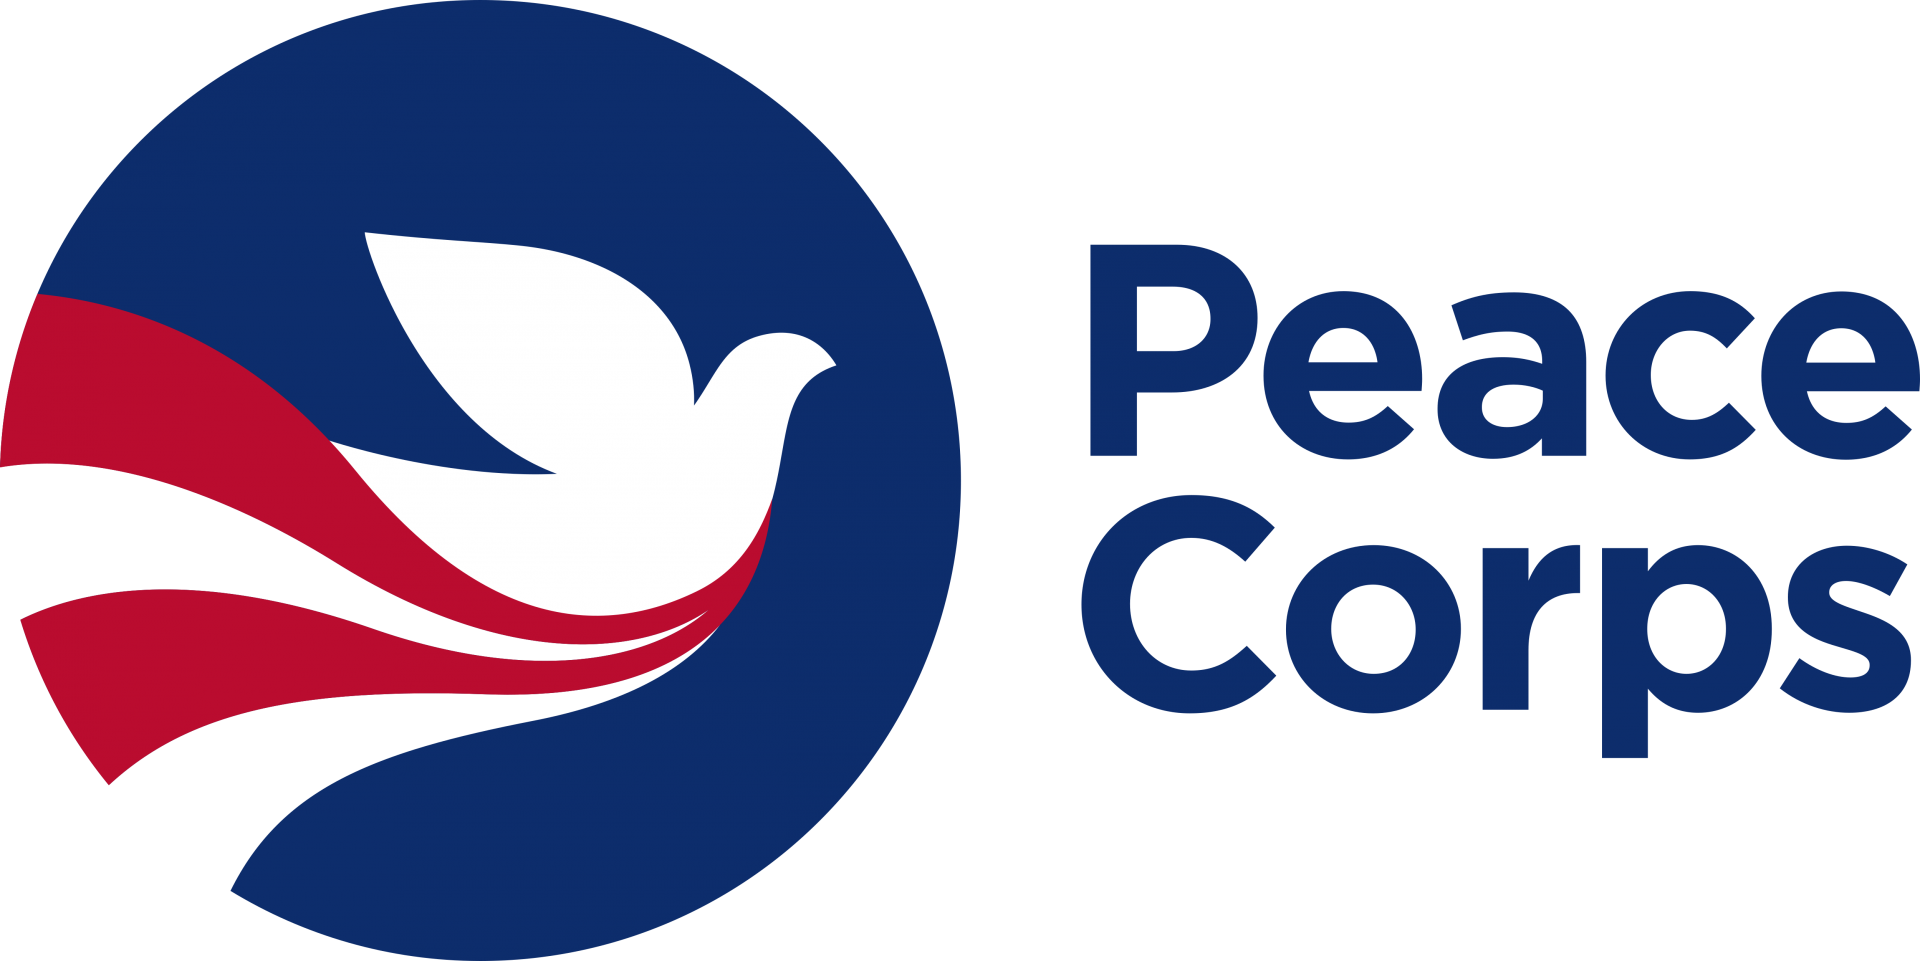 Peace Corps logo - Dove with word mark